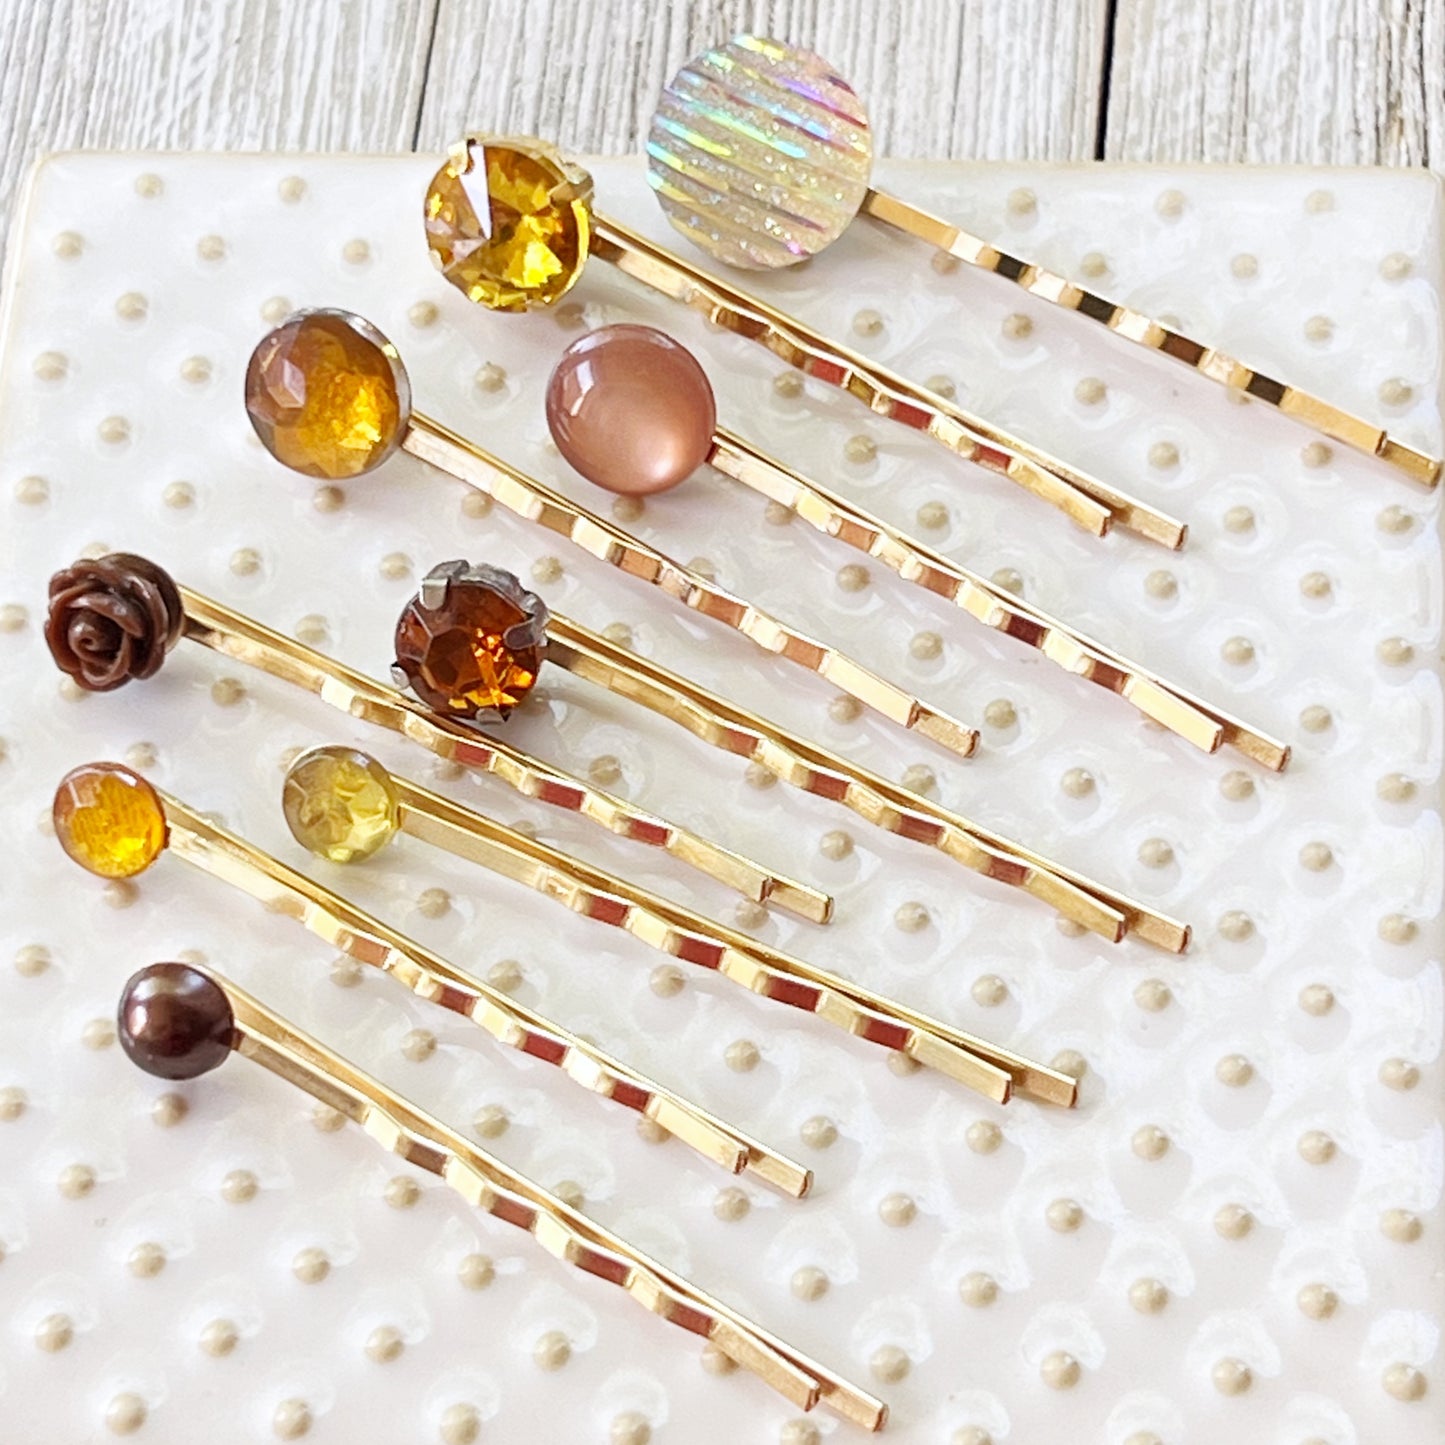 Round Rhinestone & Acrylic Hair Pins in Neutral Colors - Set of 9 Stylish Accessories